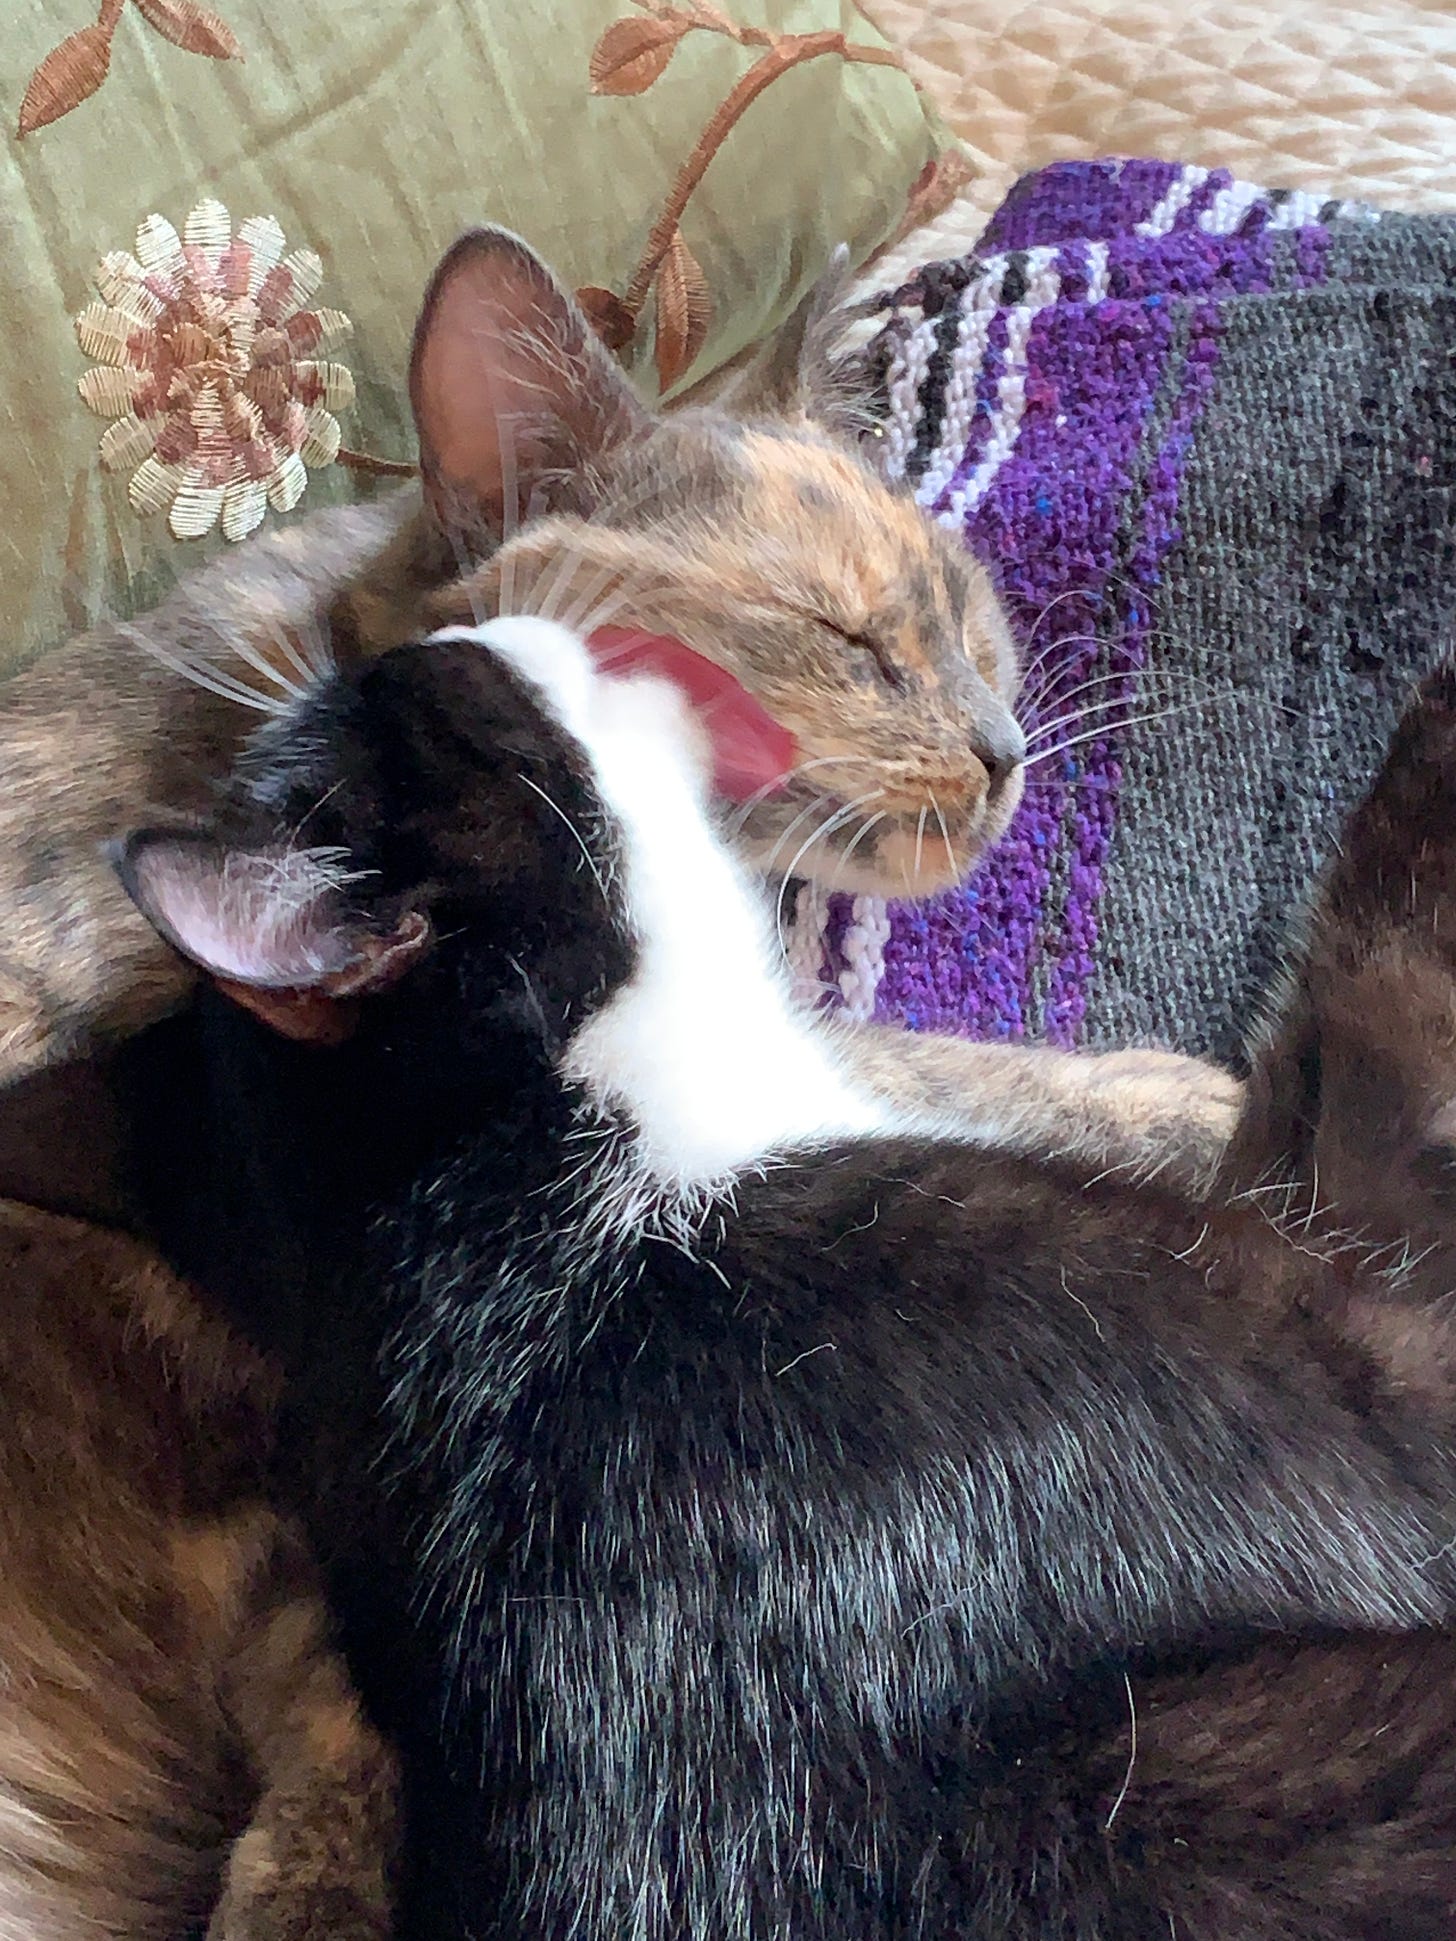 Two cats are lying on a purple and gray blanket beside a green decorative pillow. The tuxedo cat is licking his dilute tortie sister’s face. She looks like she’s smiling.